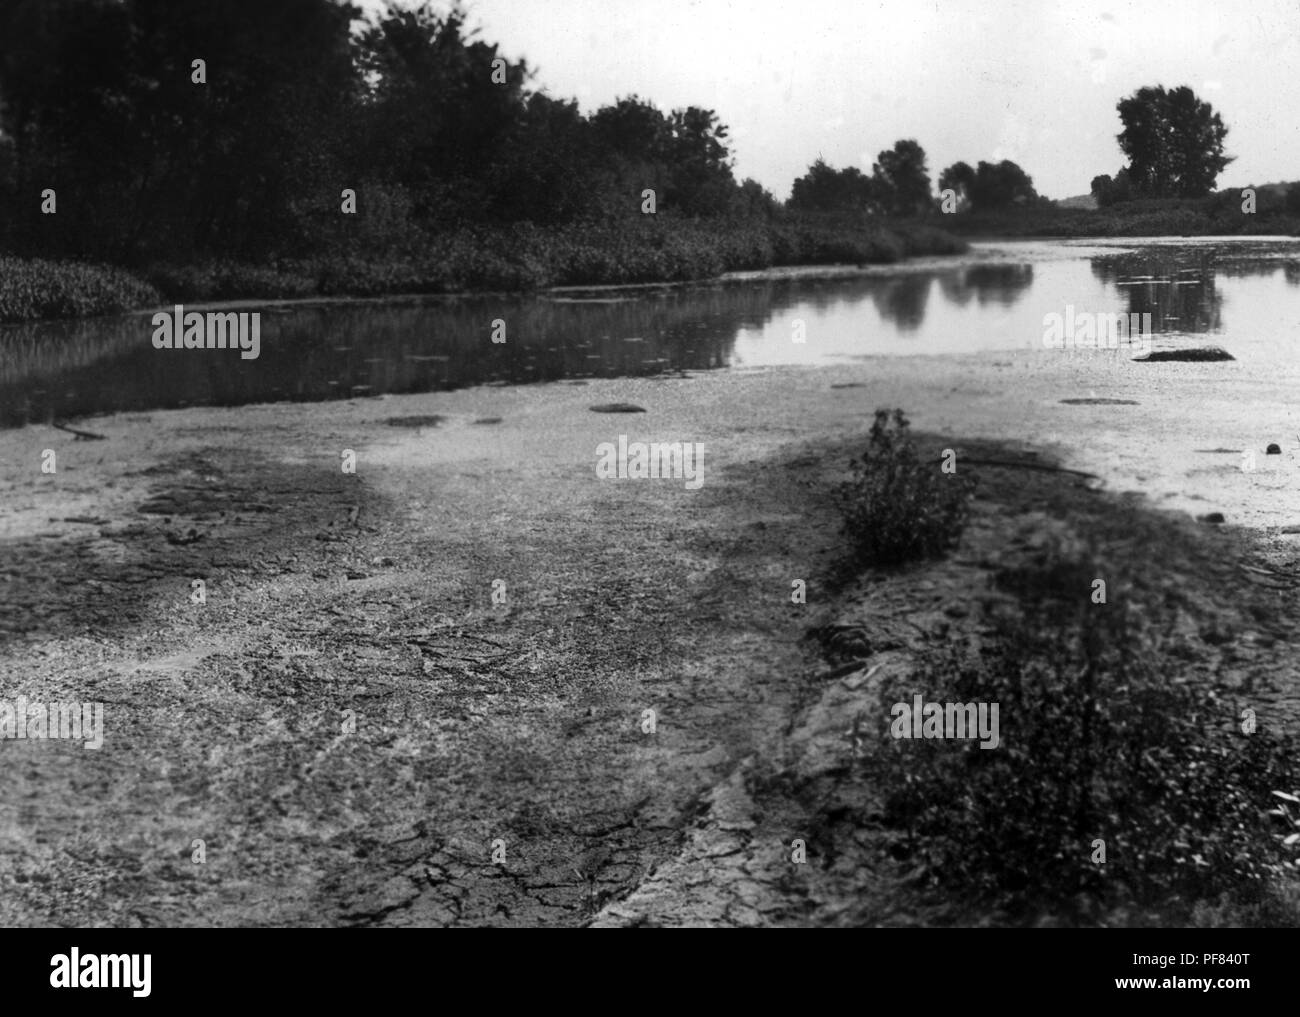 Presence of pollution in the Shellrock River as a result of dumping waste from a canning factory, Albert Lea, Minnesota, 1924. Image courtesy Centers for Disease Control (CDC) / Minnesota Department of Health, R.N. Barr Library, Librarians Melissa Rethlefsen and Marie Jones. () Stock Photo